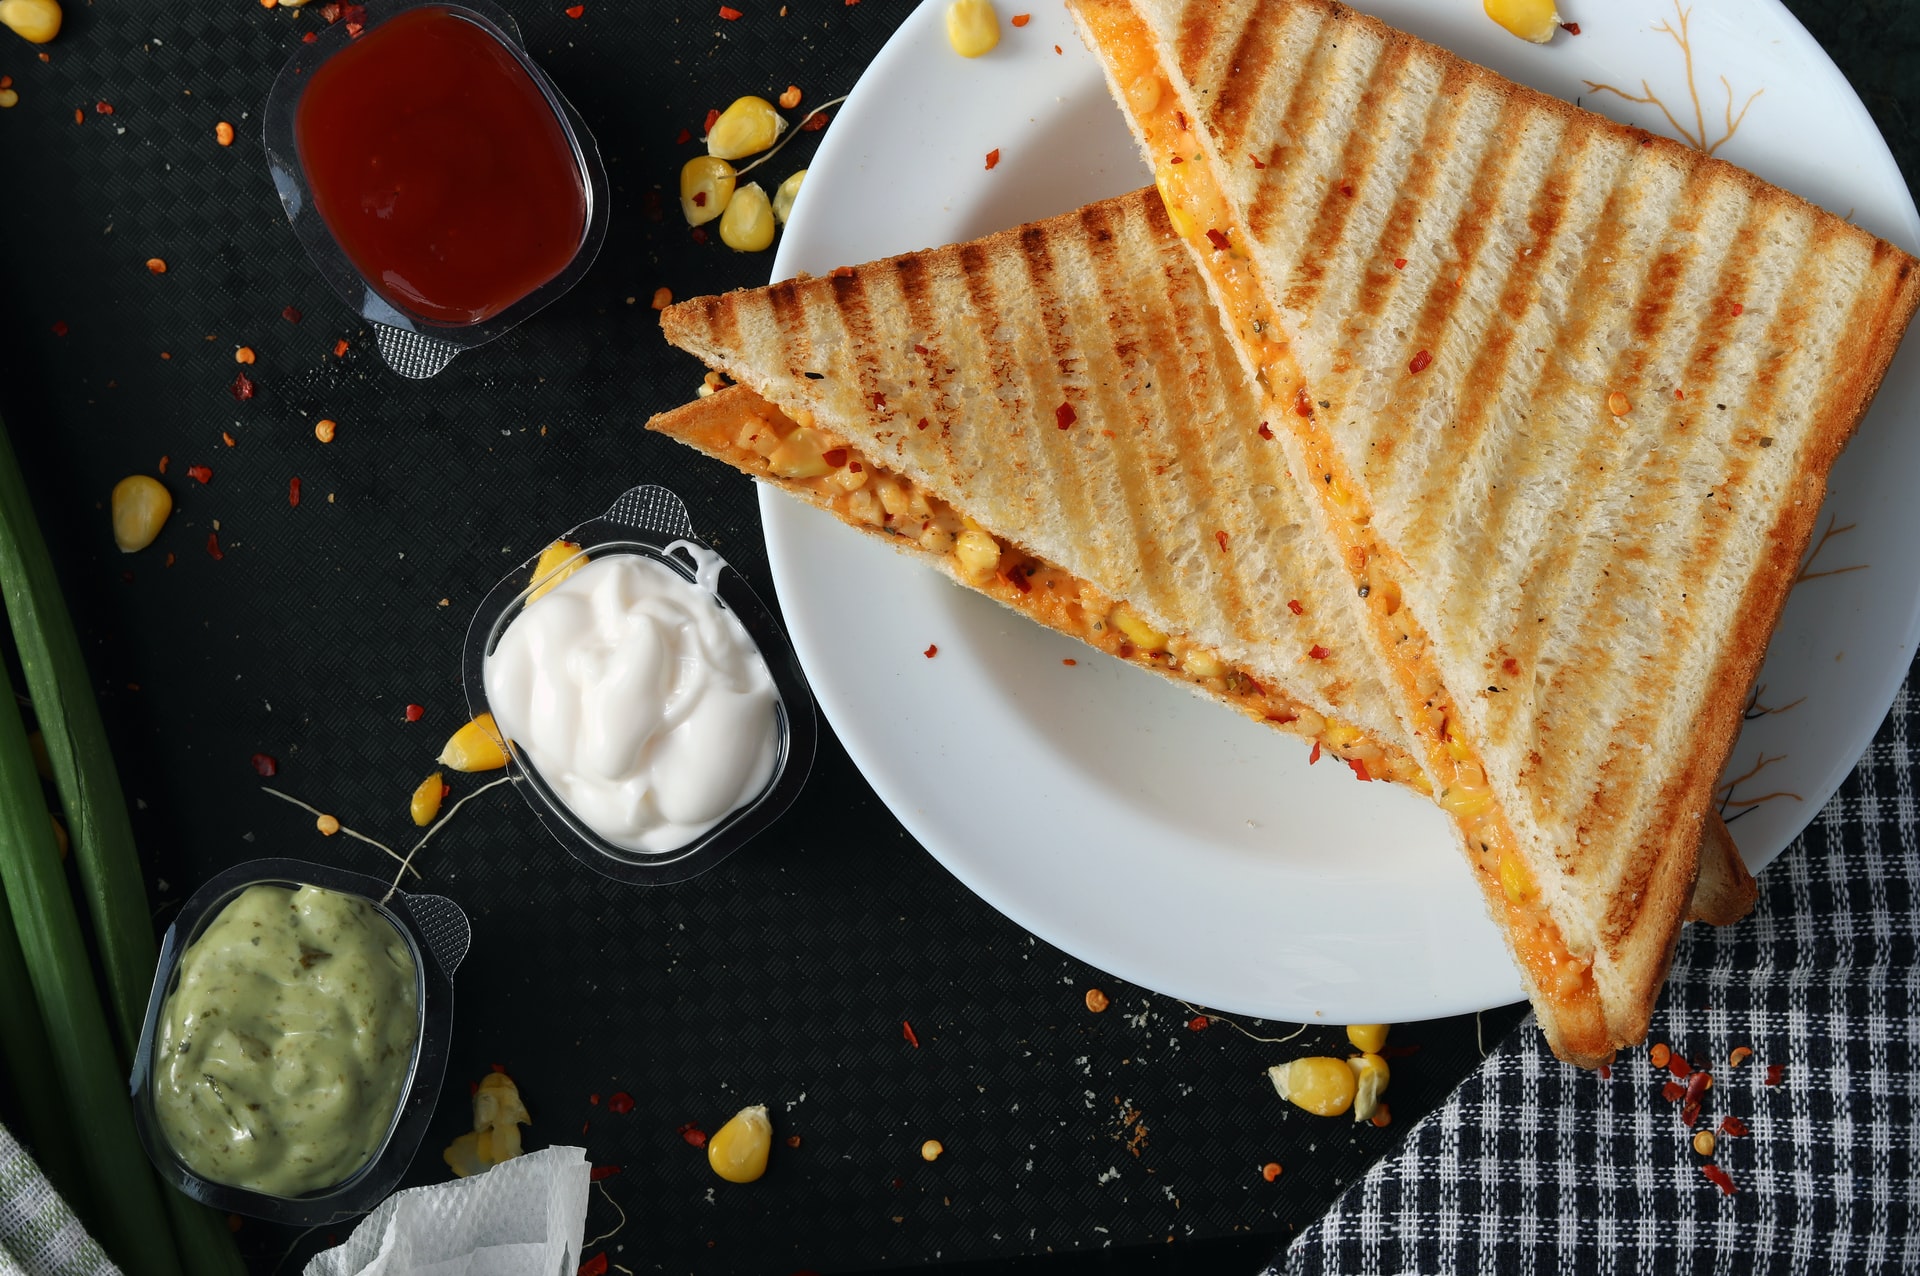 grilled sandwich on plate